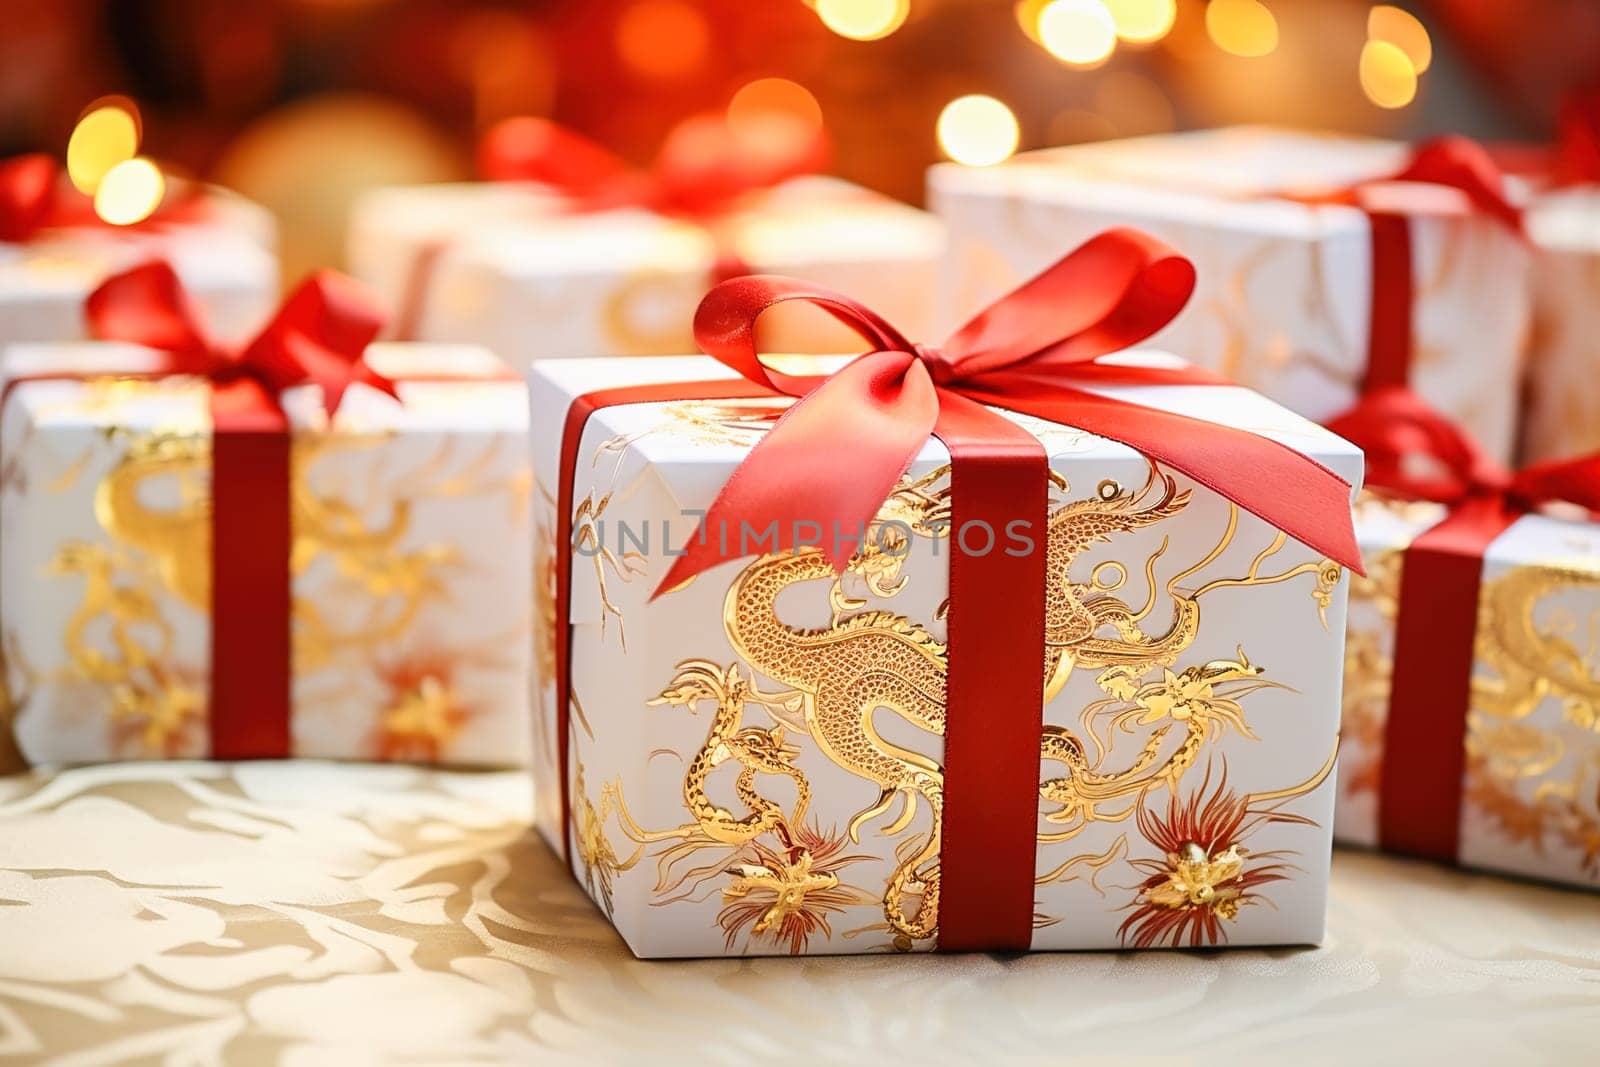 A white gift box with a dragon image is tied with a red ribbon. by Yurich32